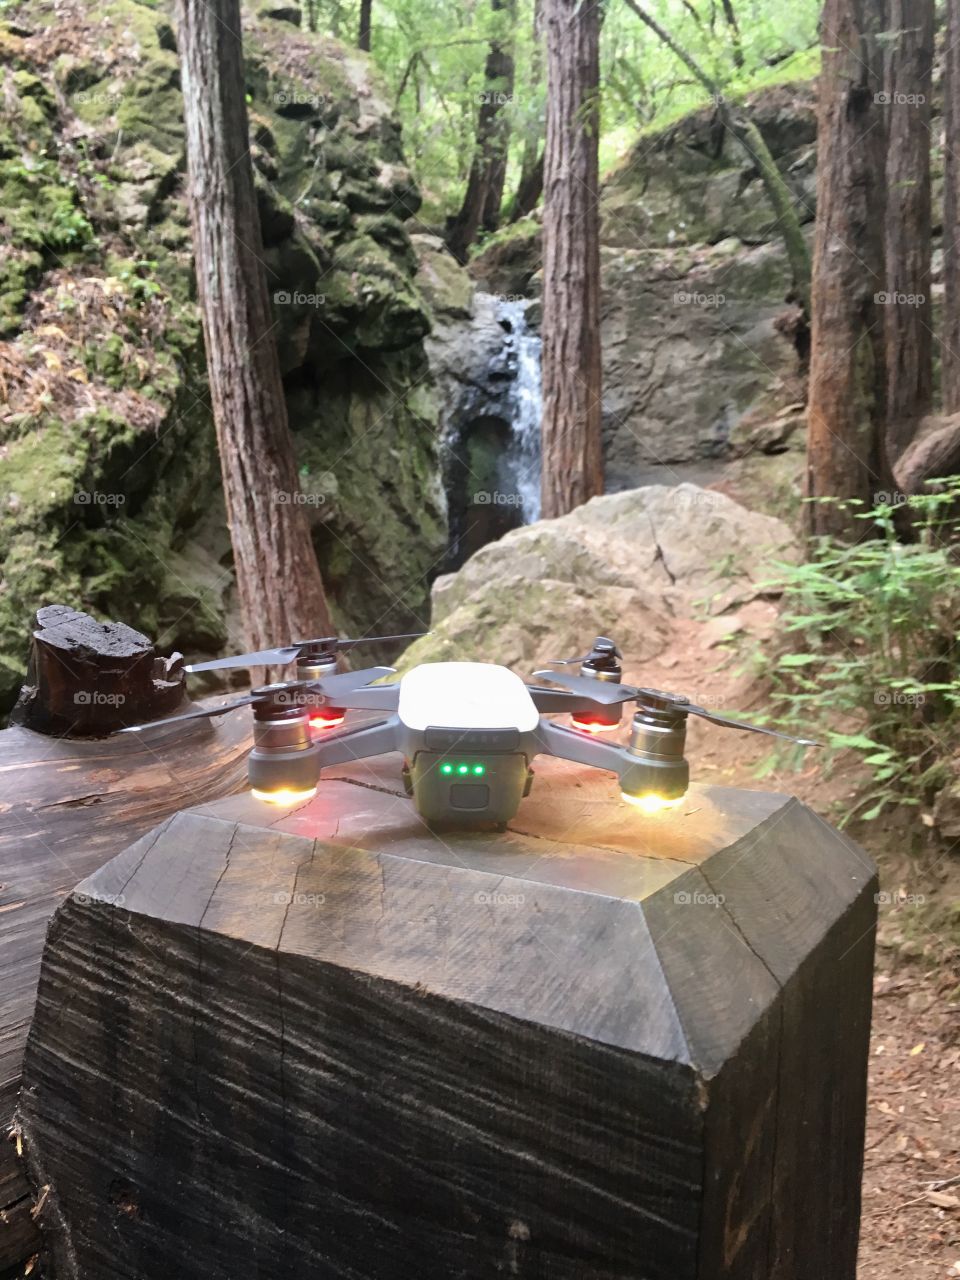 DJI Spark drone ready for take off in a forest with a beautiful waterfall in the background 